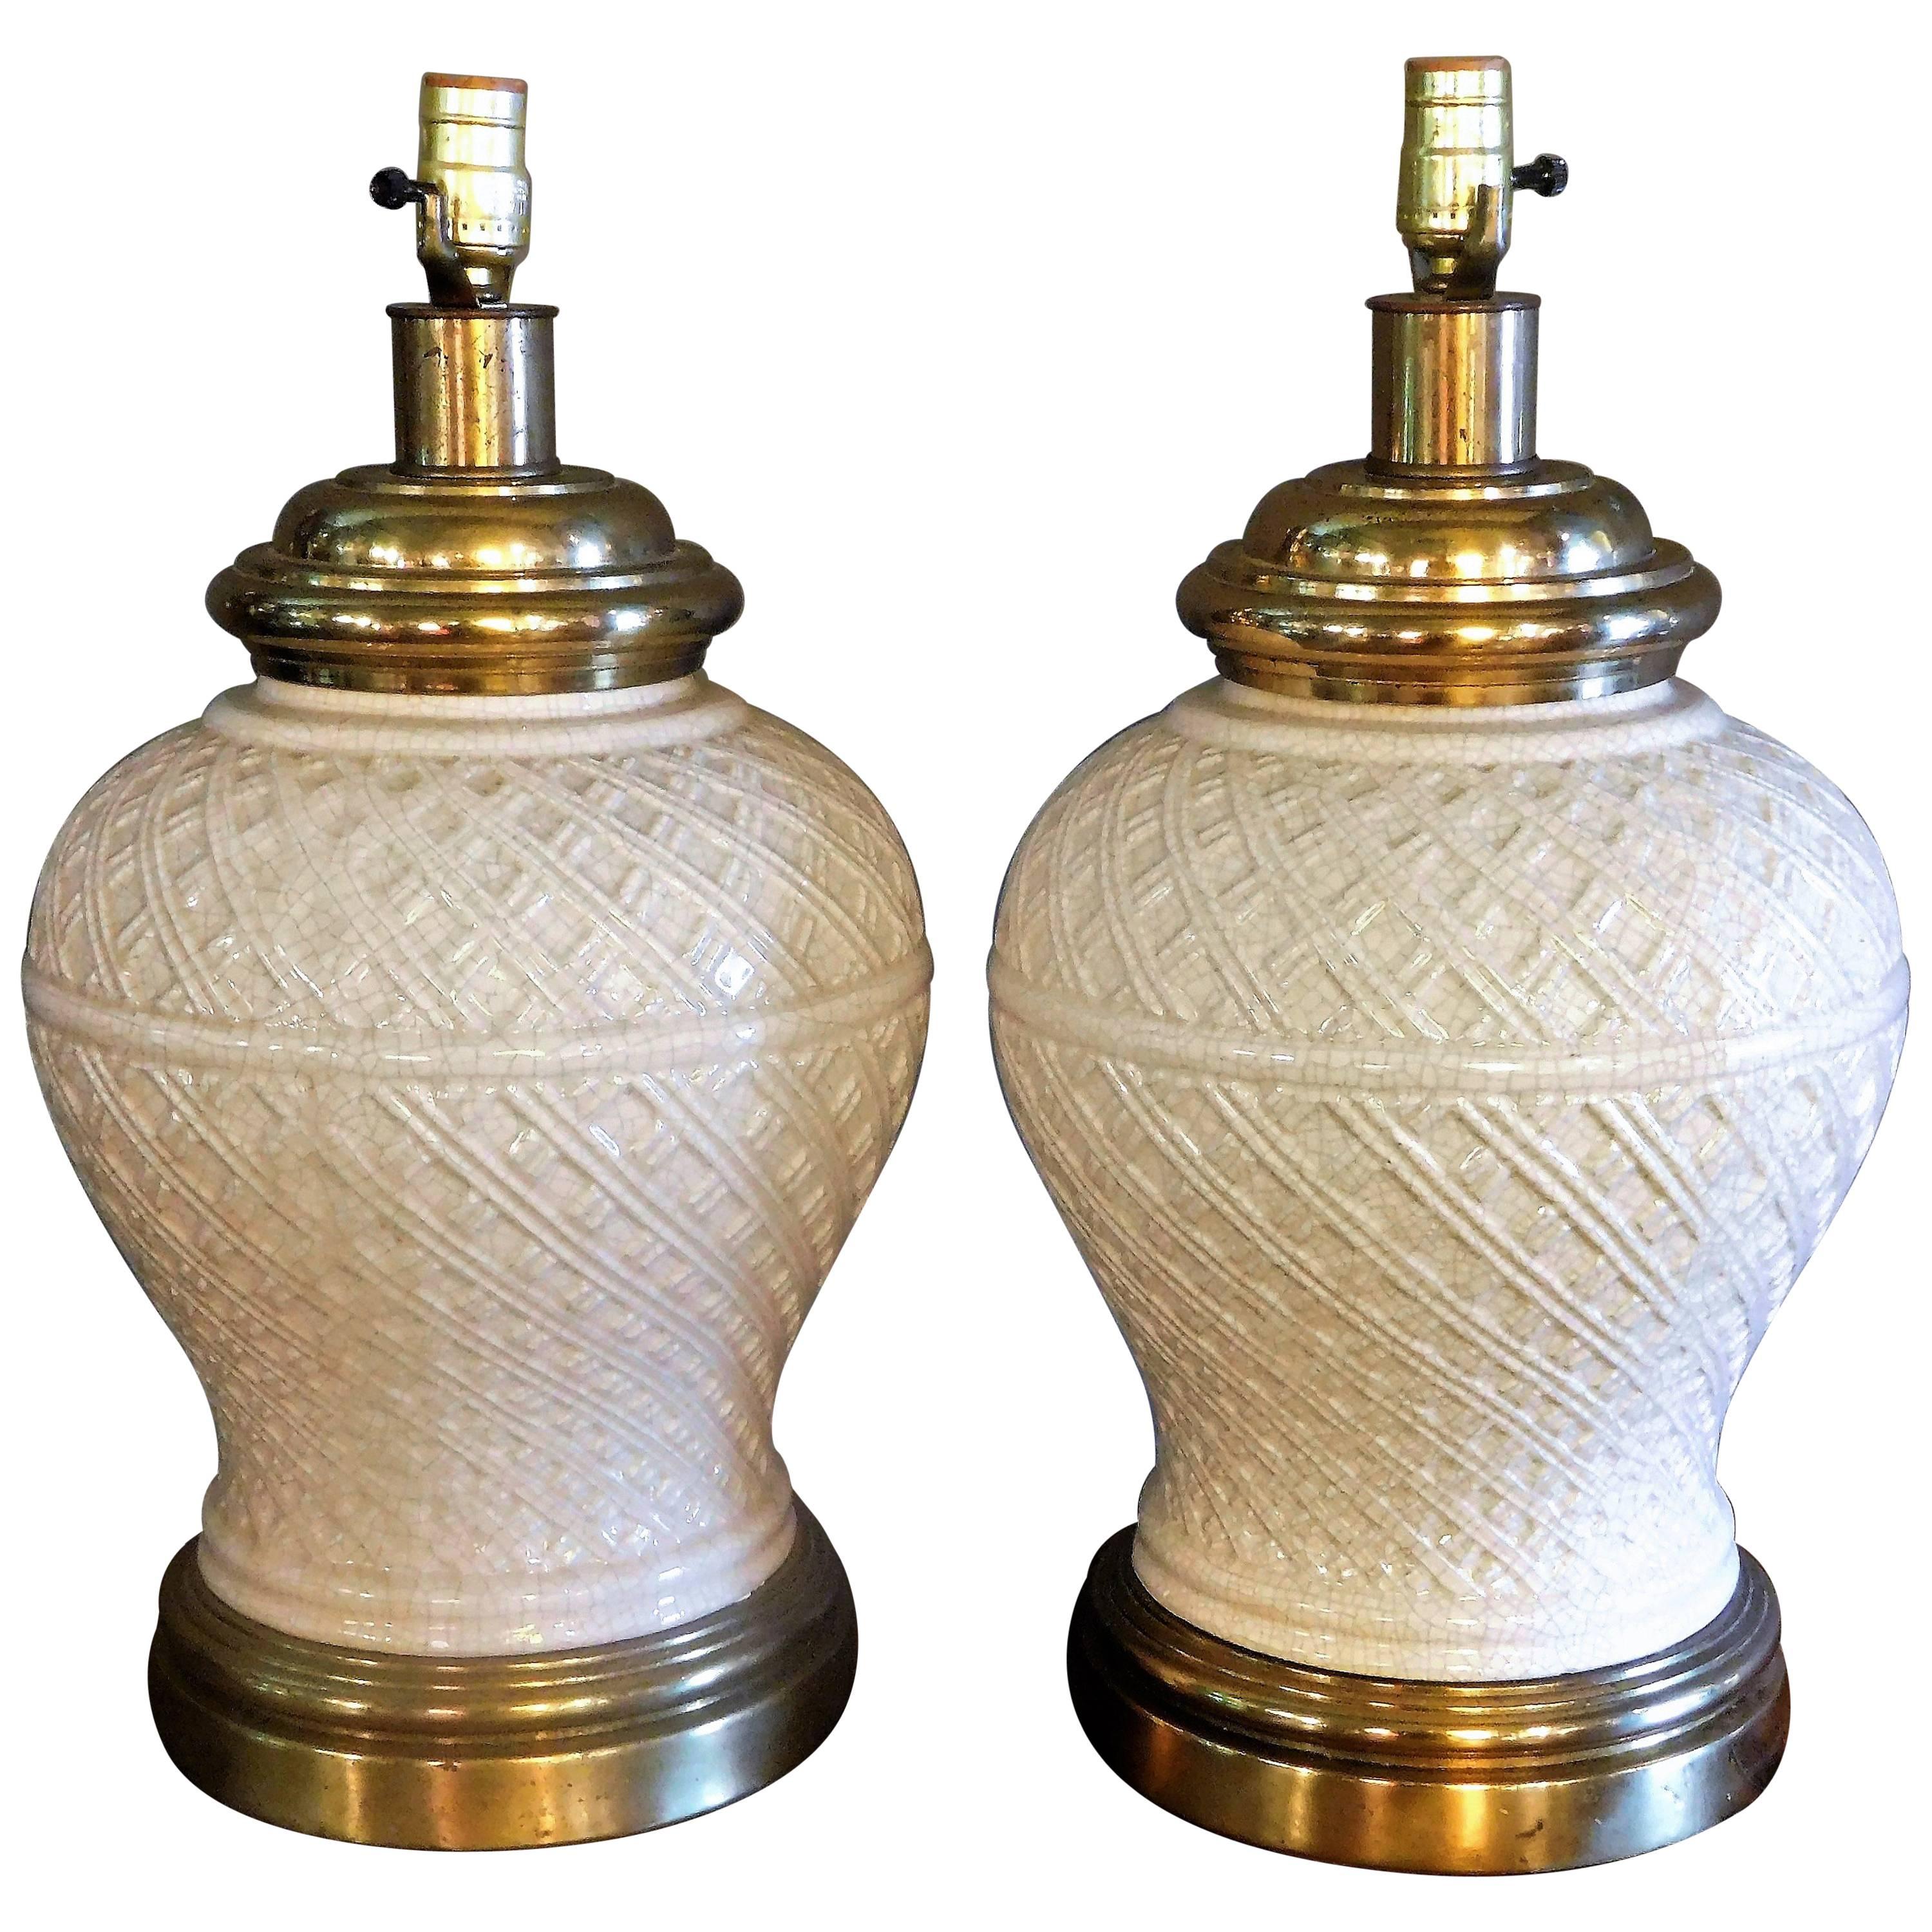 Pair of Ceramic Basket-Weave Paul Hanson Lamps with Ivory Crackle Glaze, 1955 For Sale